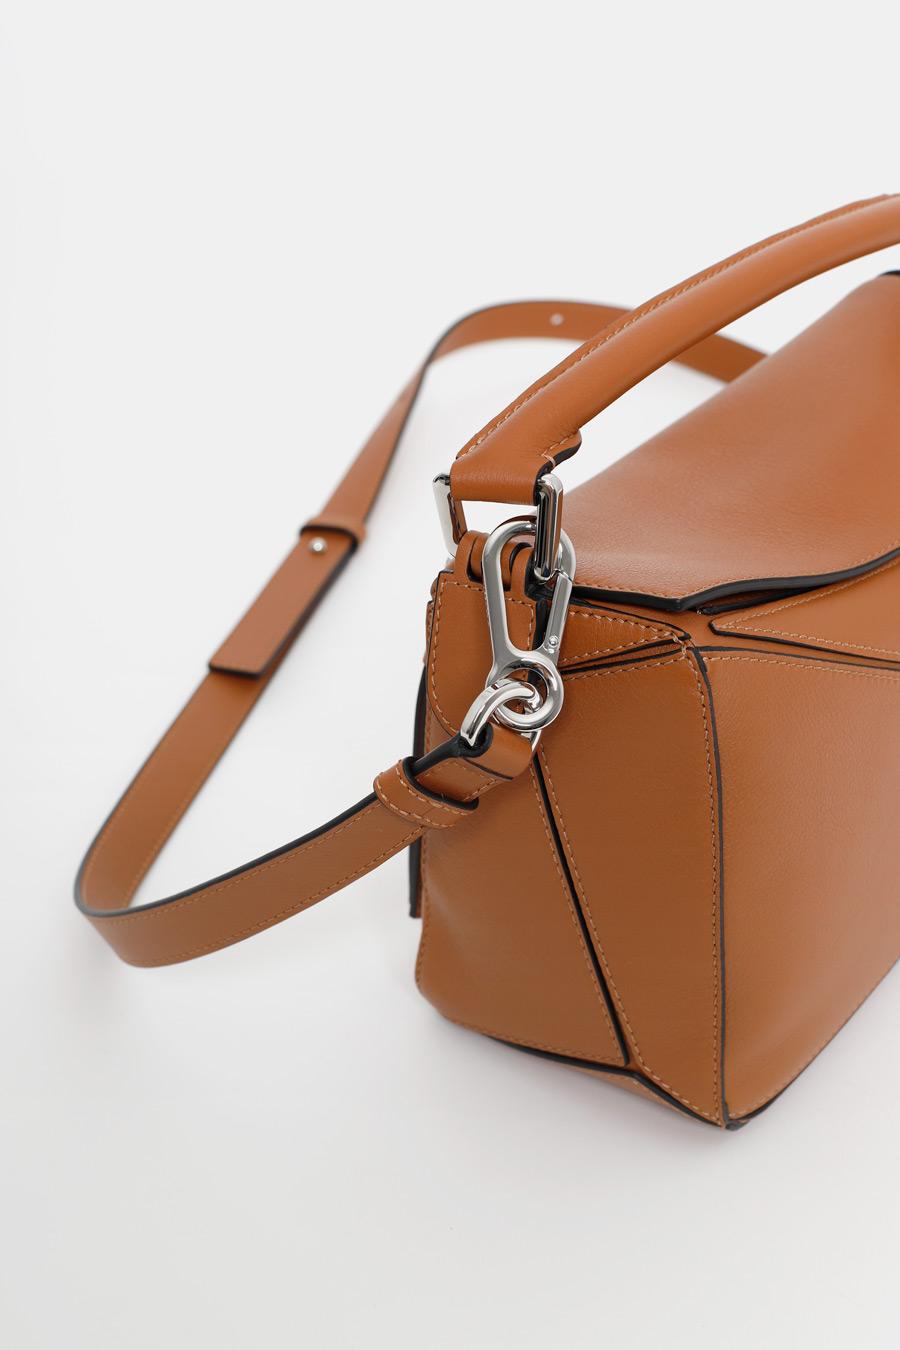 Loewe Leather Small Puzzle Bag in Camel (Brown) - Lyst